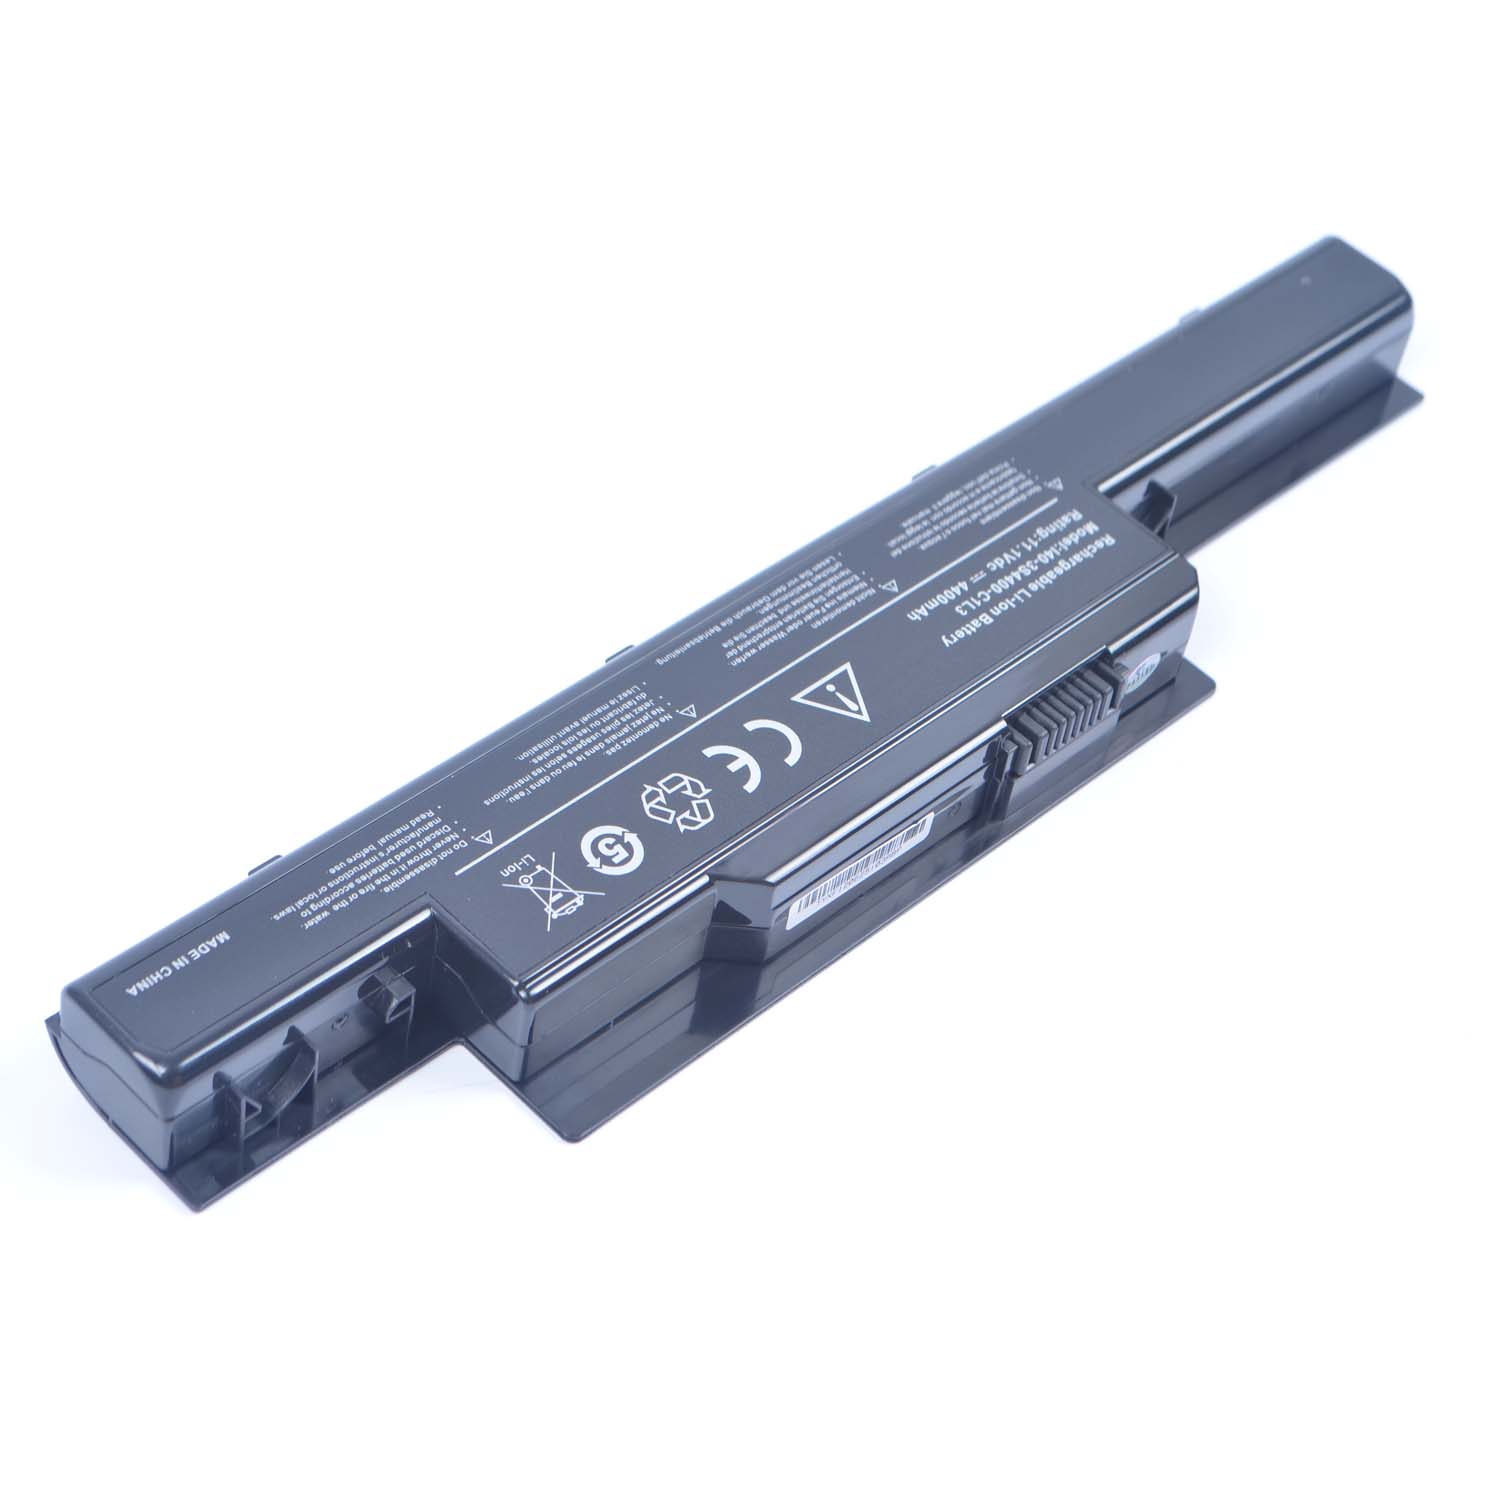 Replacement Battery for FOUNDER FOUNDER R410 battery